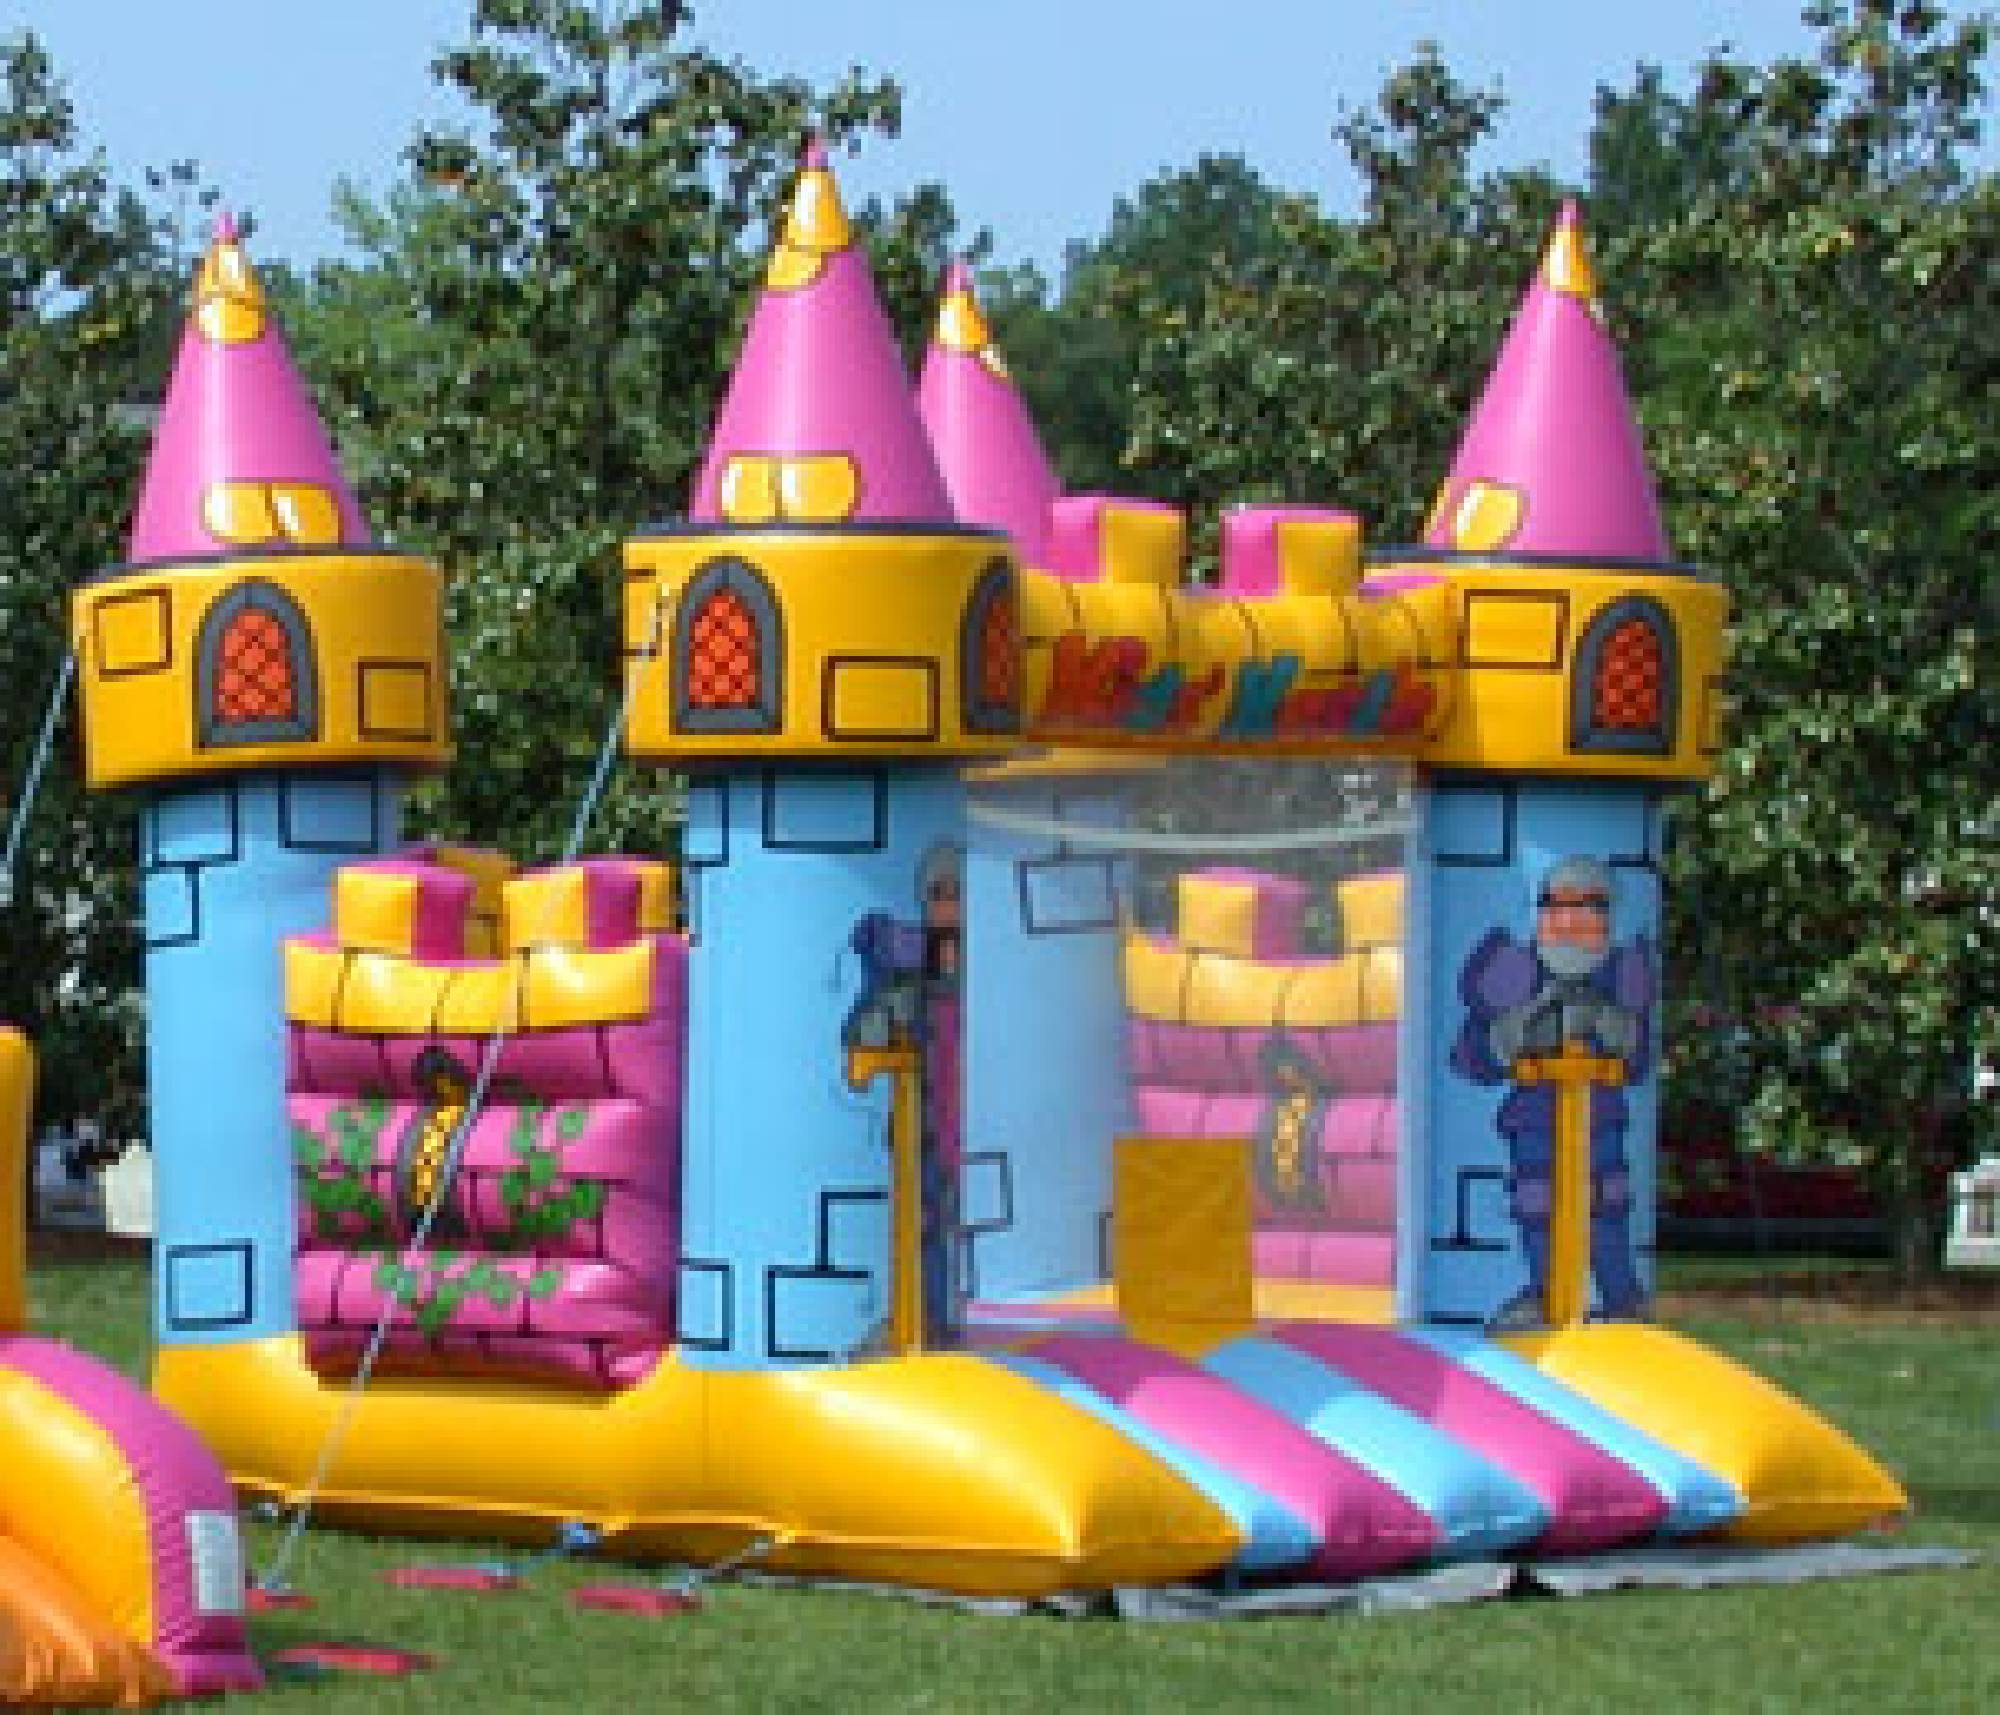 Side view of the Kid Kastle bounce house in Morrisville